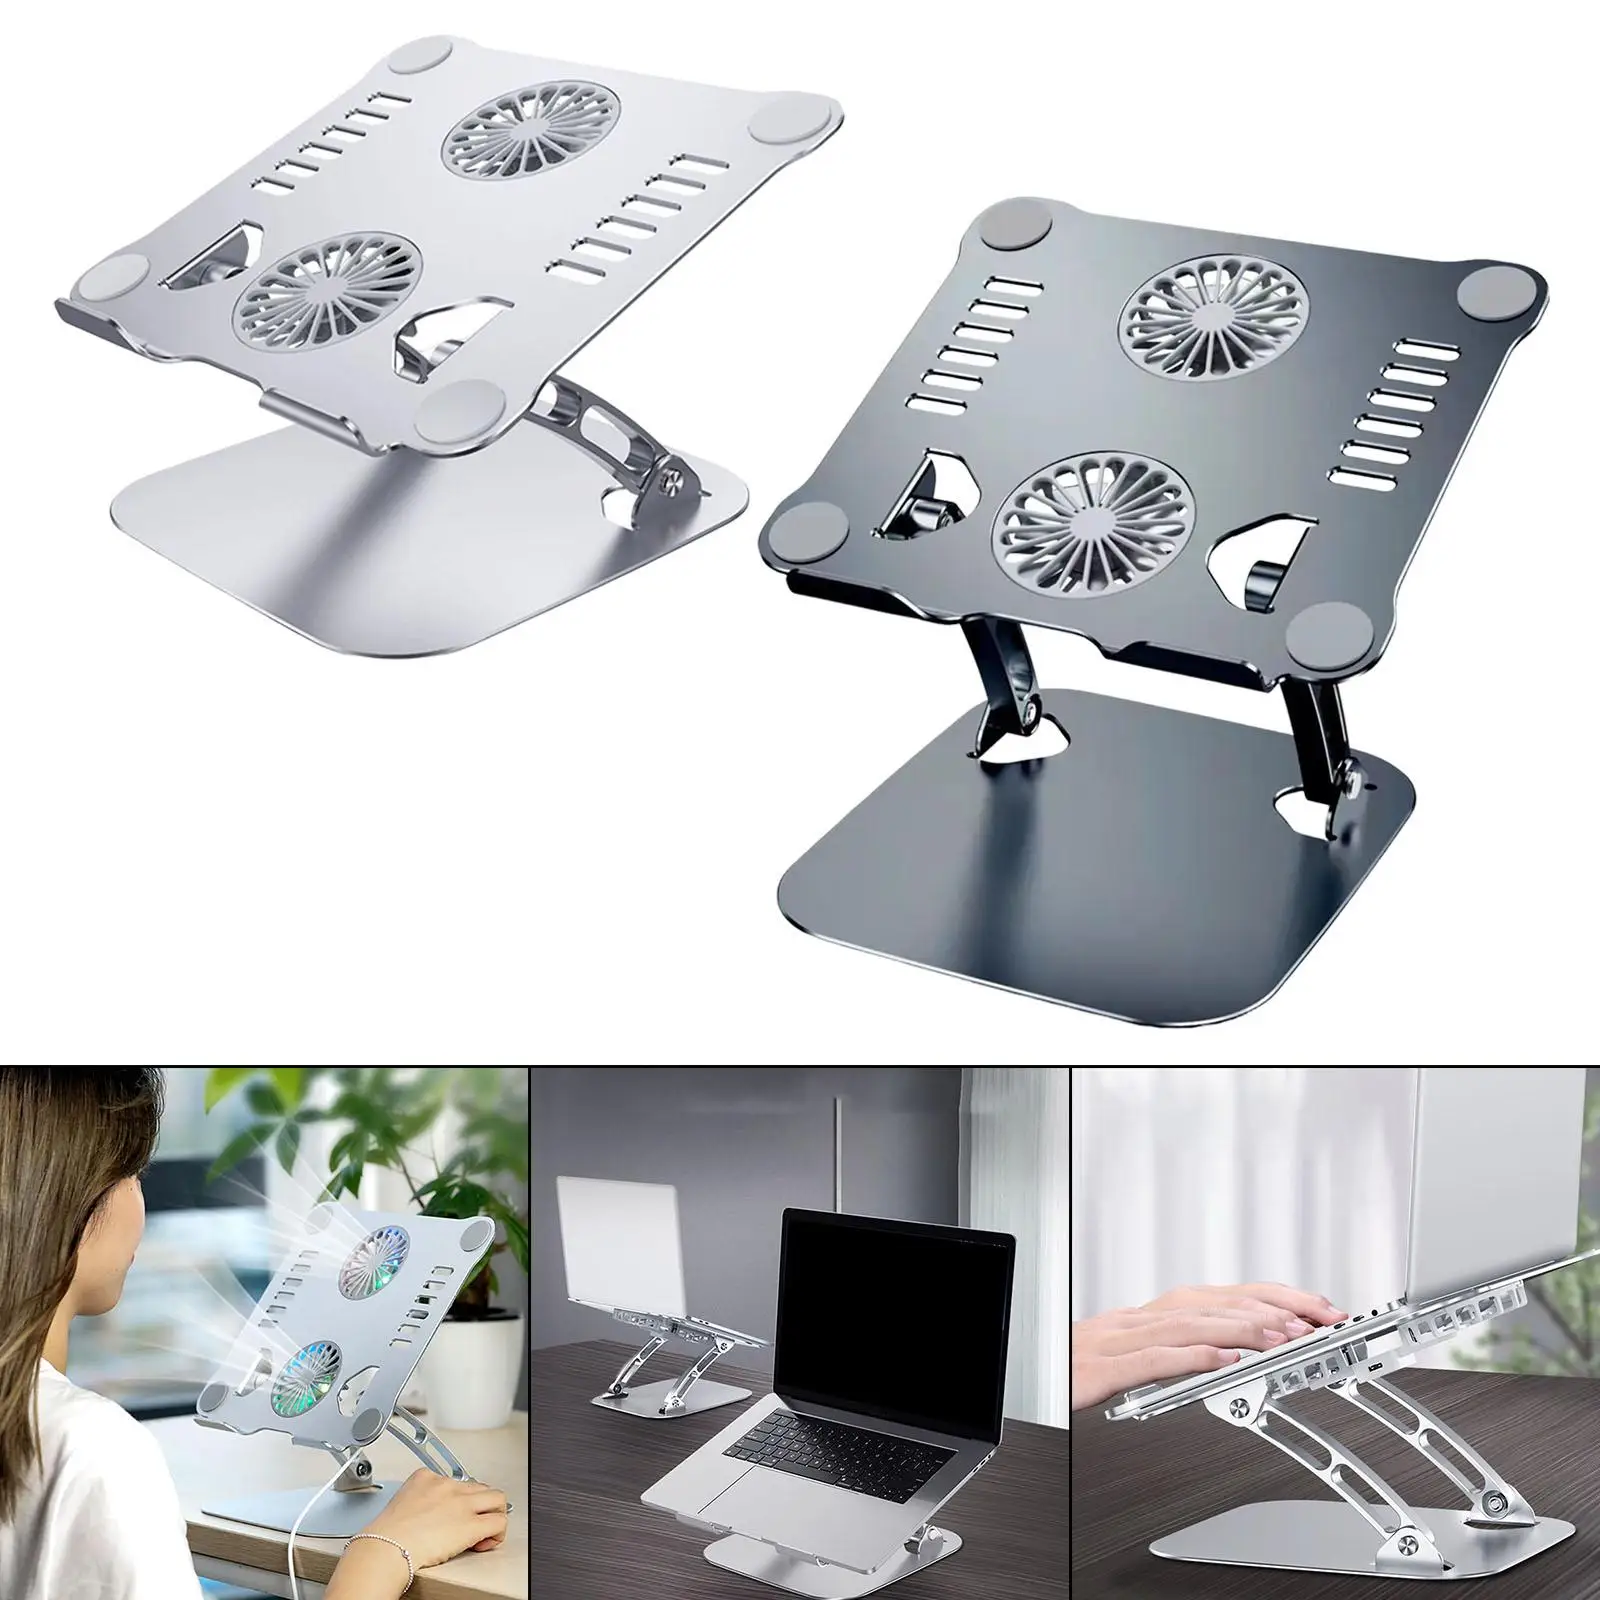 Laptop Stand Dual Fan Radiator Foldable Non Slip Notebook Computer Bracket Portable Metal Mount Cooler for ASUS for All Laptops